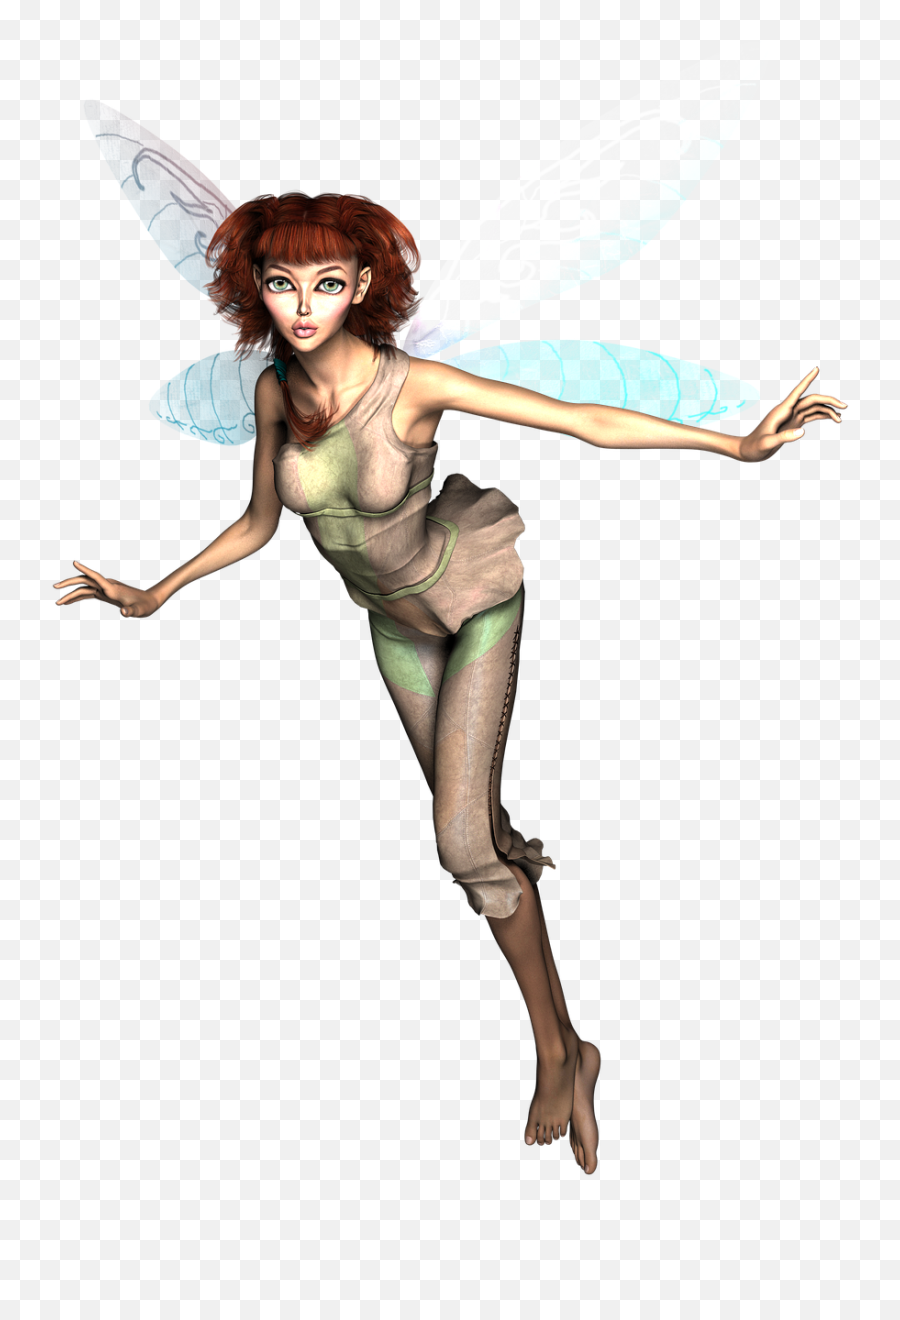 Womanfemale3dcut - Outtransparent Background Free Image Emoji,Fairy Transparent Background